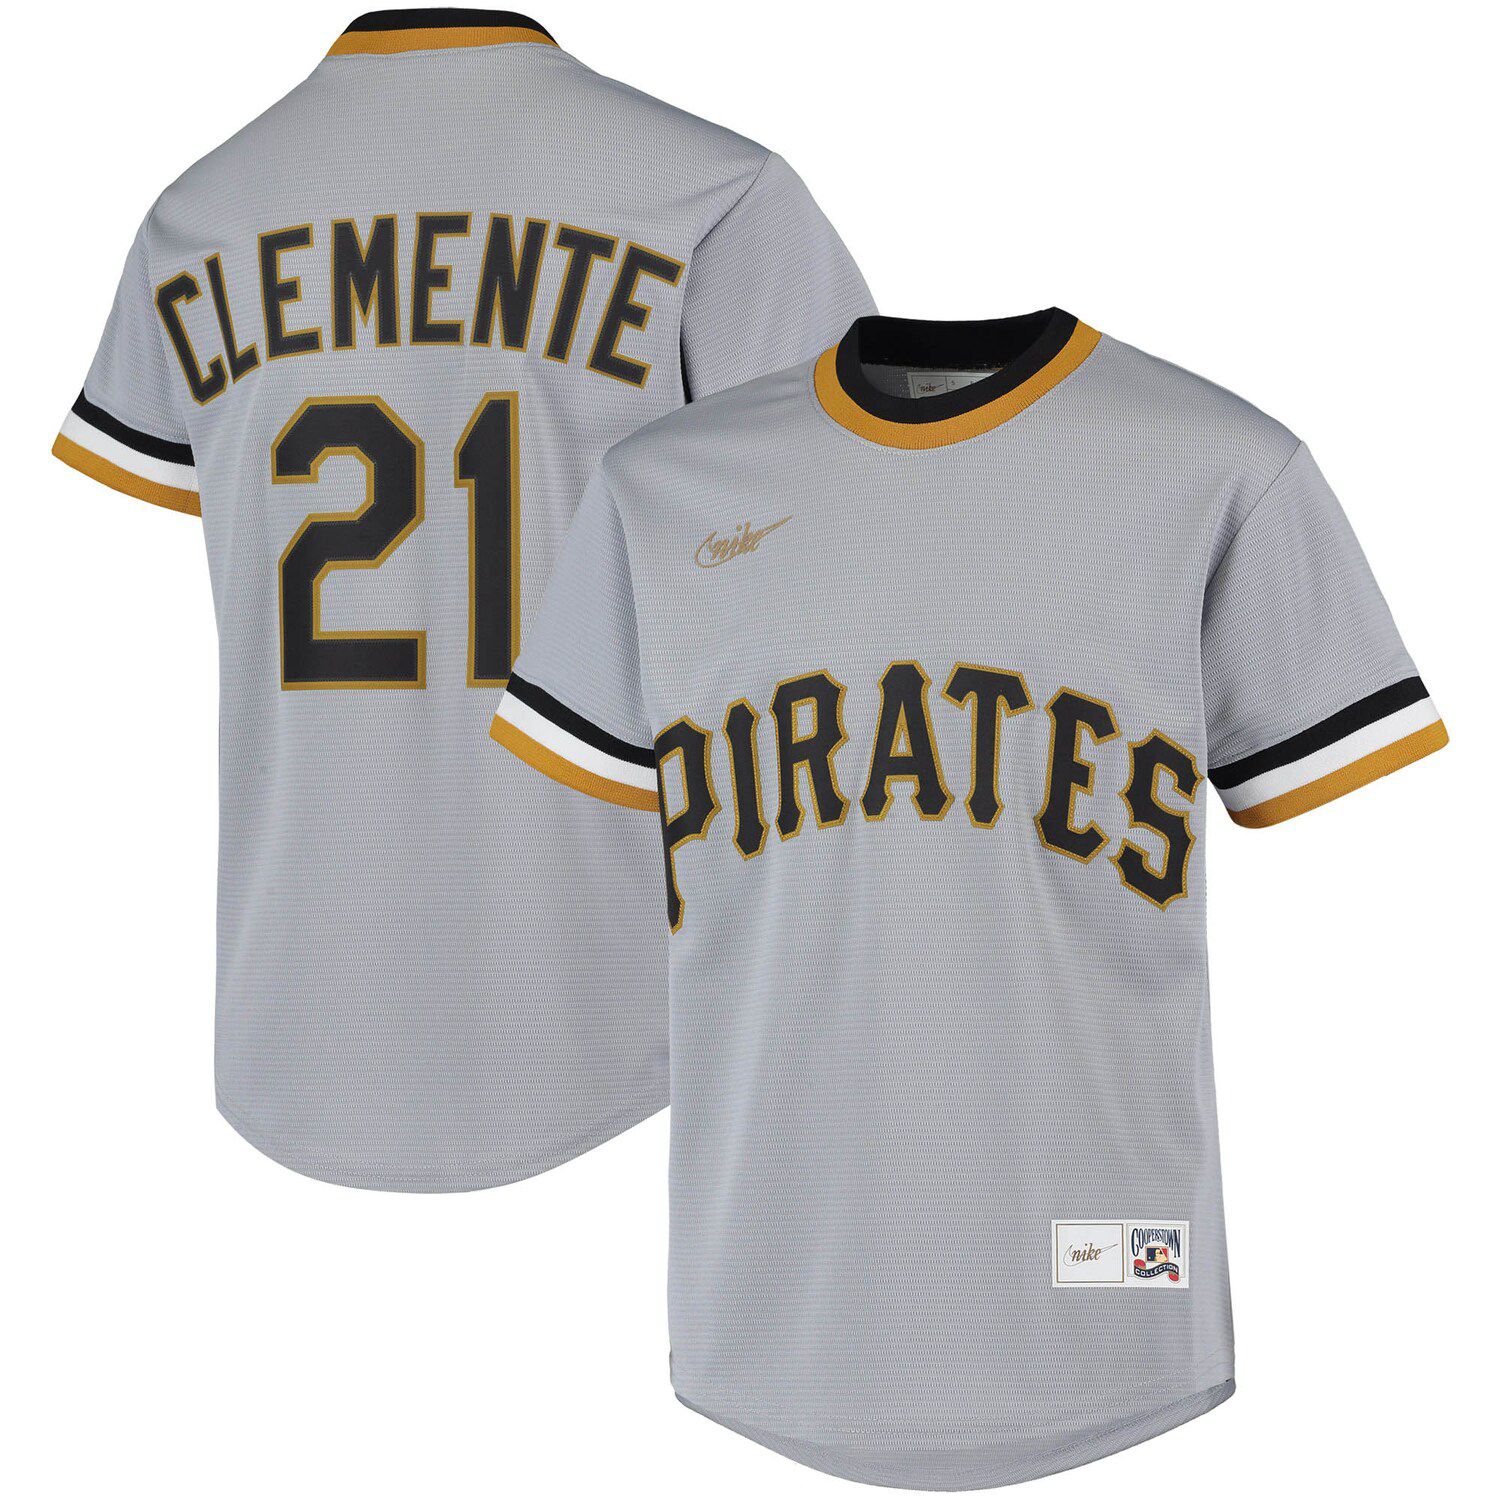 roberto clemente cooperstown collection jersey